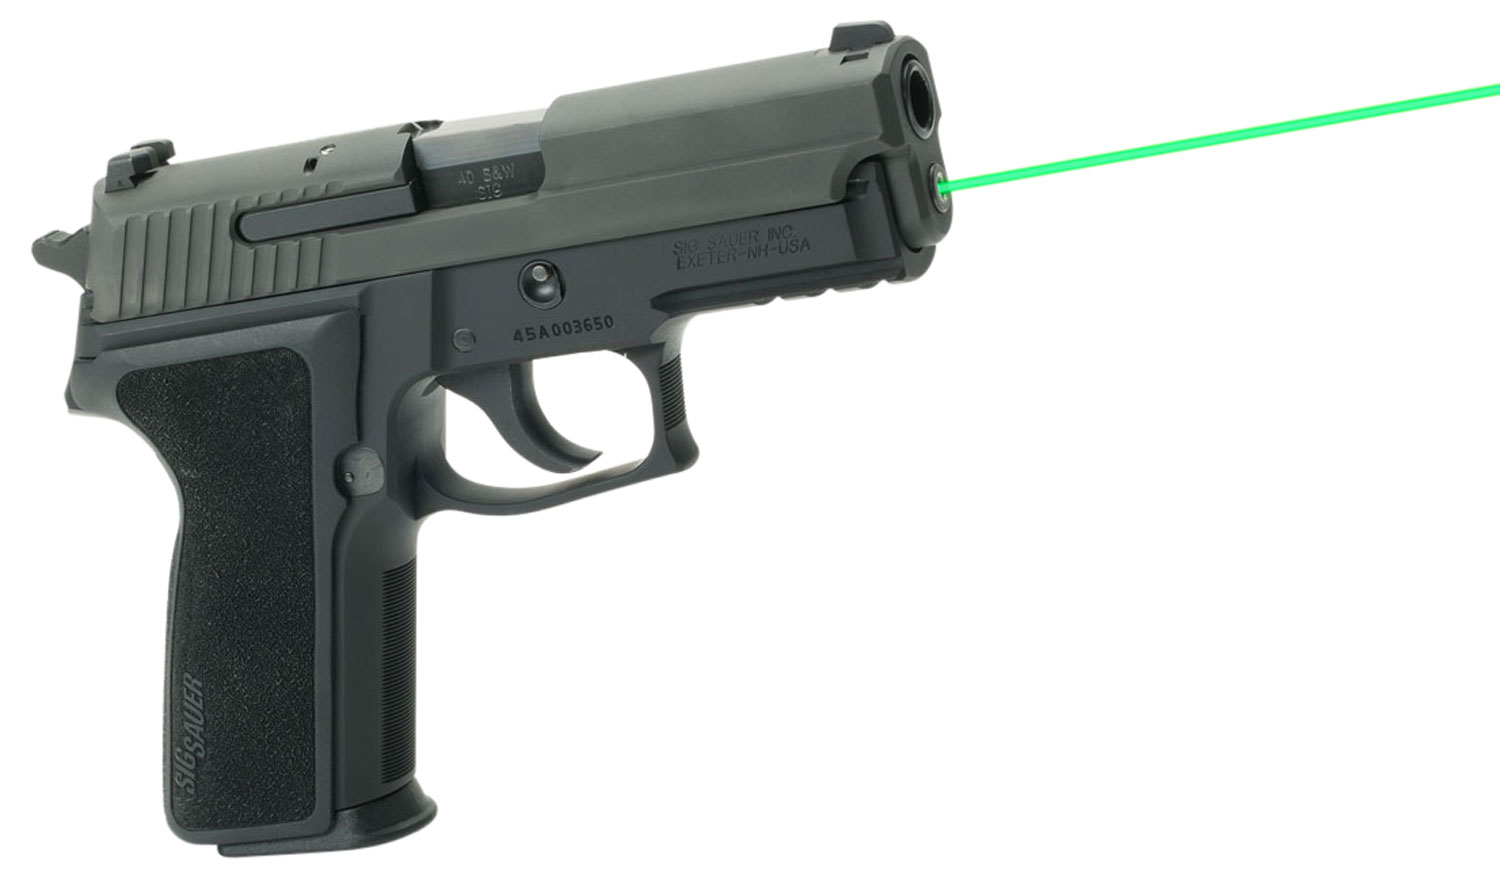 LaserMax LMS2291G Guide Rod Laser 5mW Green Laser with 520nM Wavelength & Made of Aluminum for Sig P229, P228